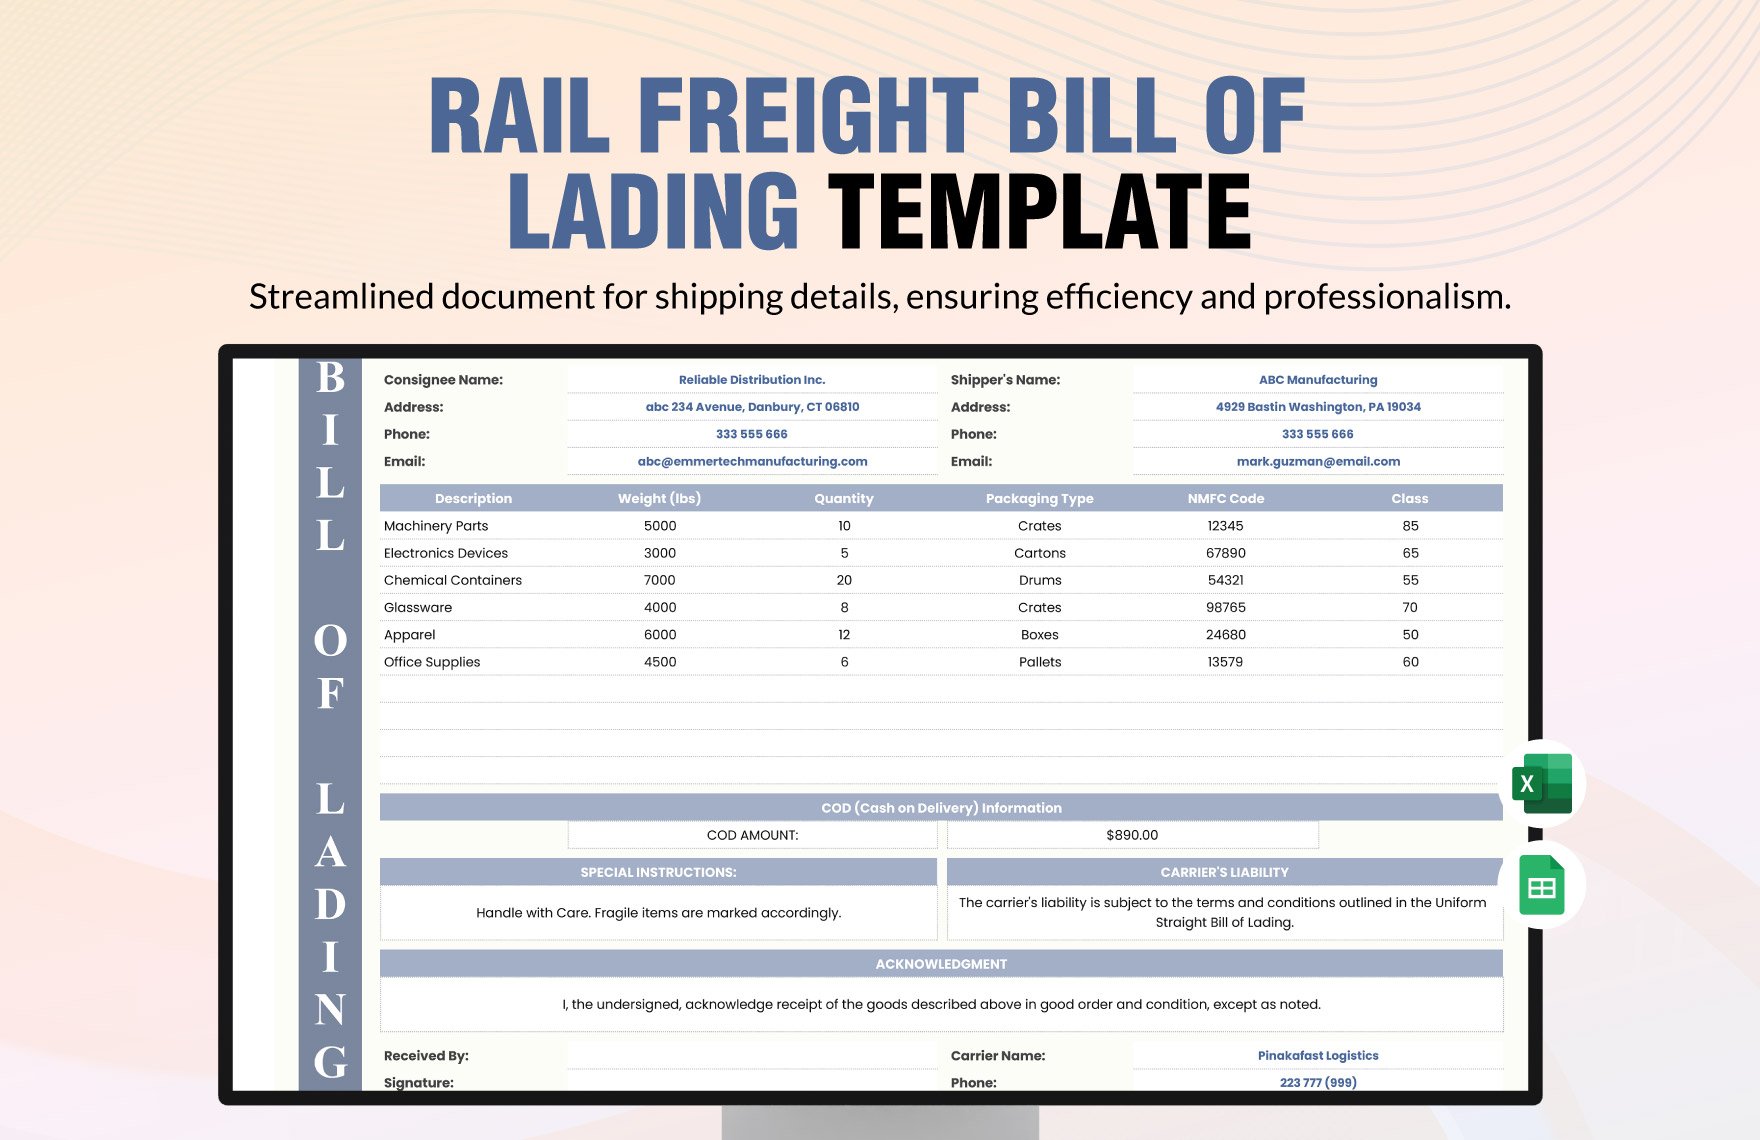 Rail Freight Bill of Lading Template in Excel, Google Sheets